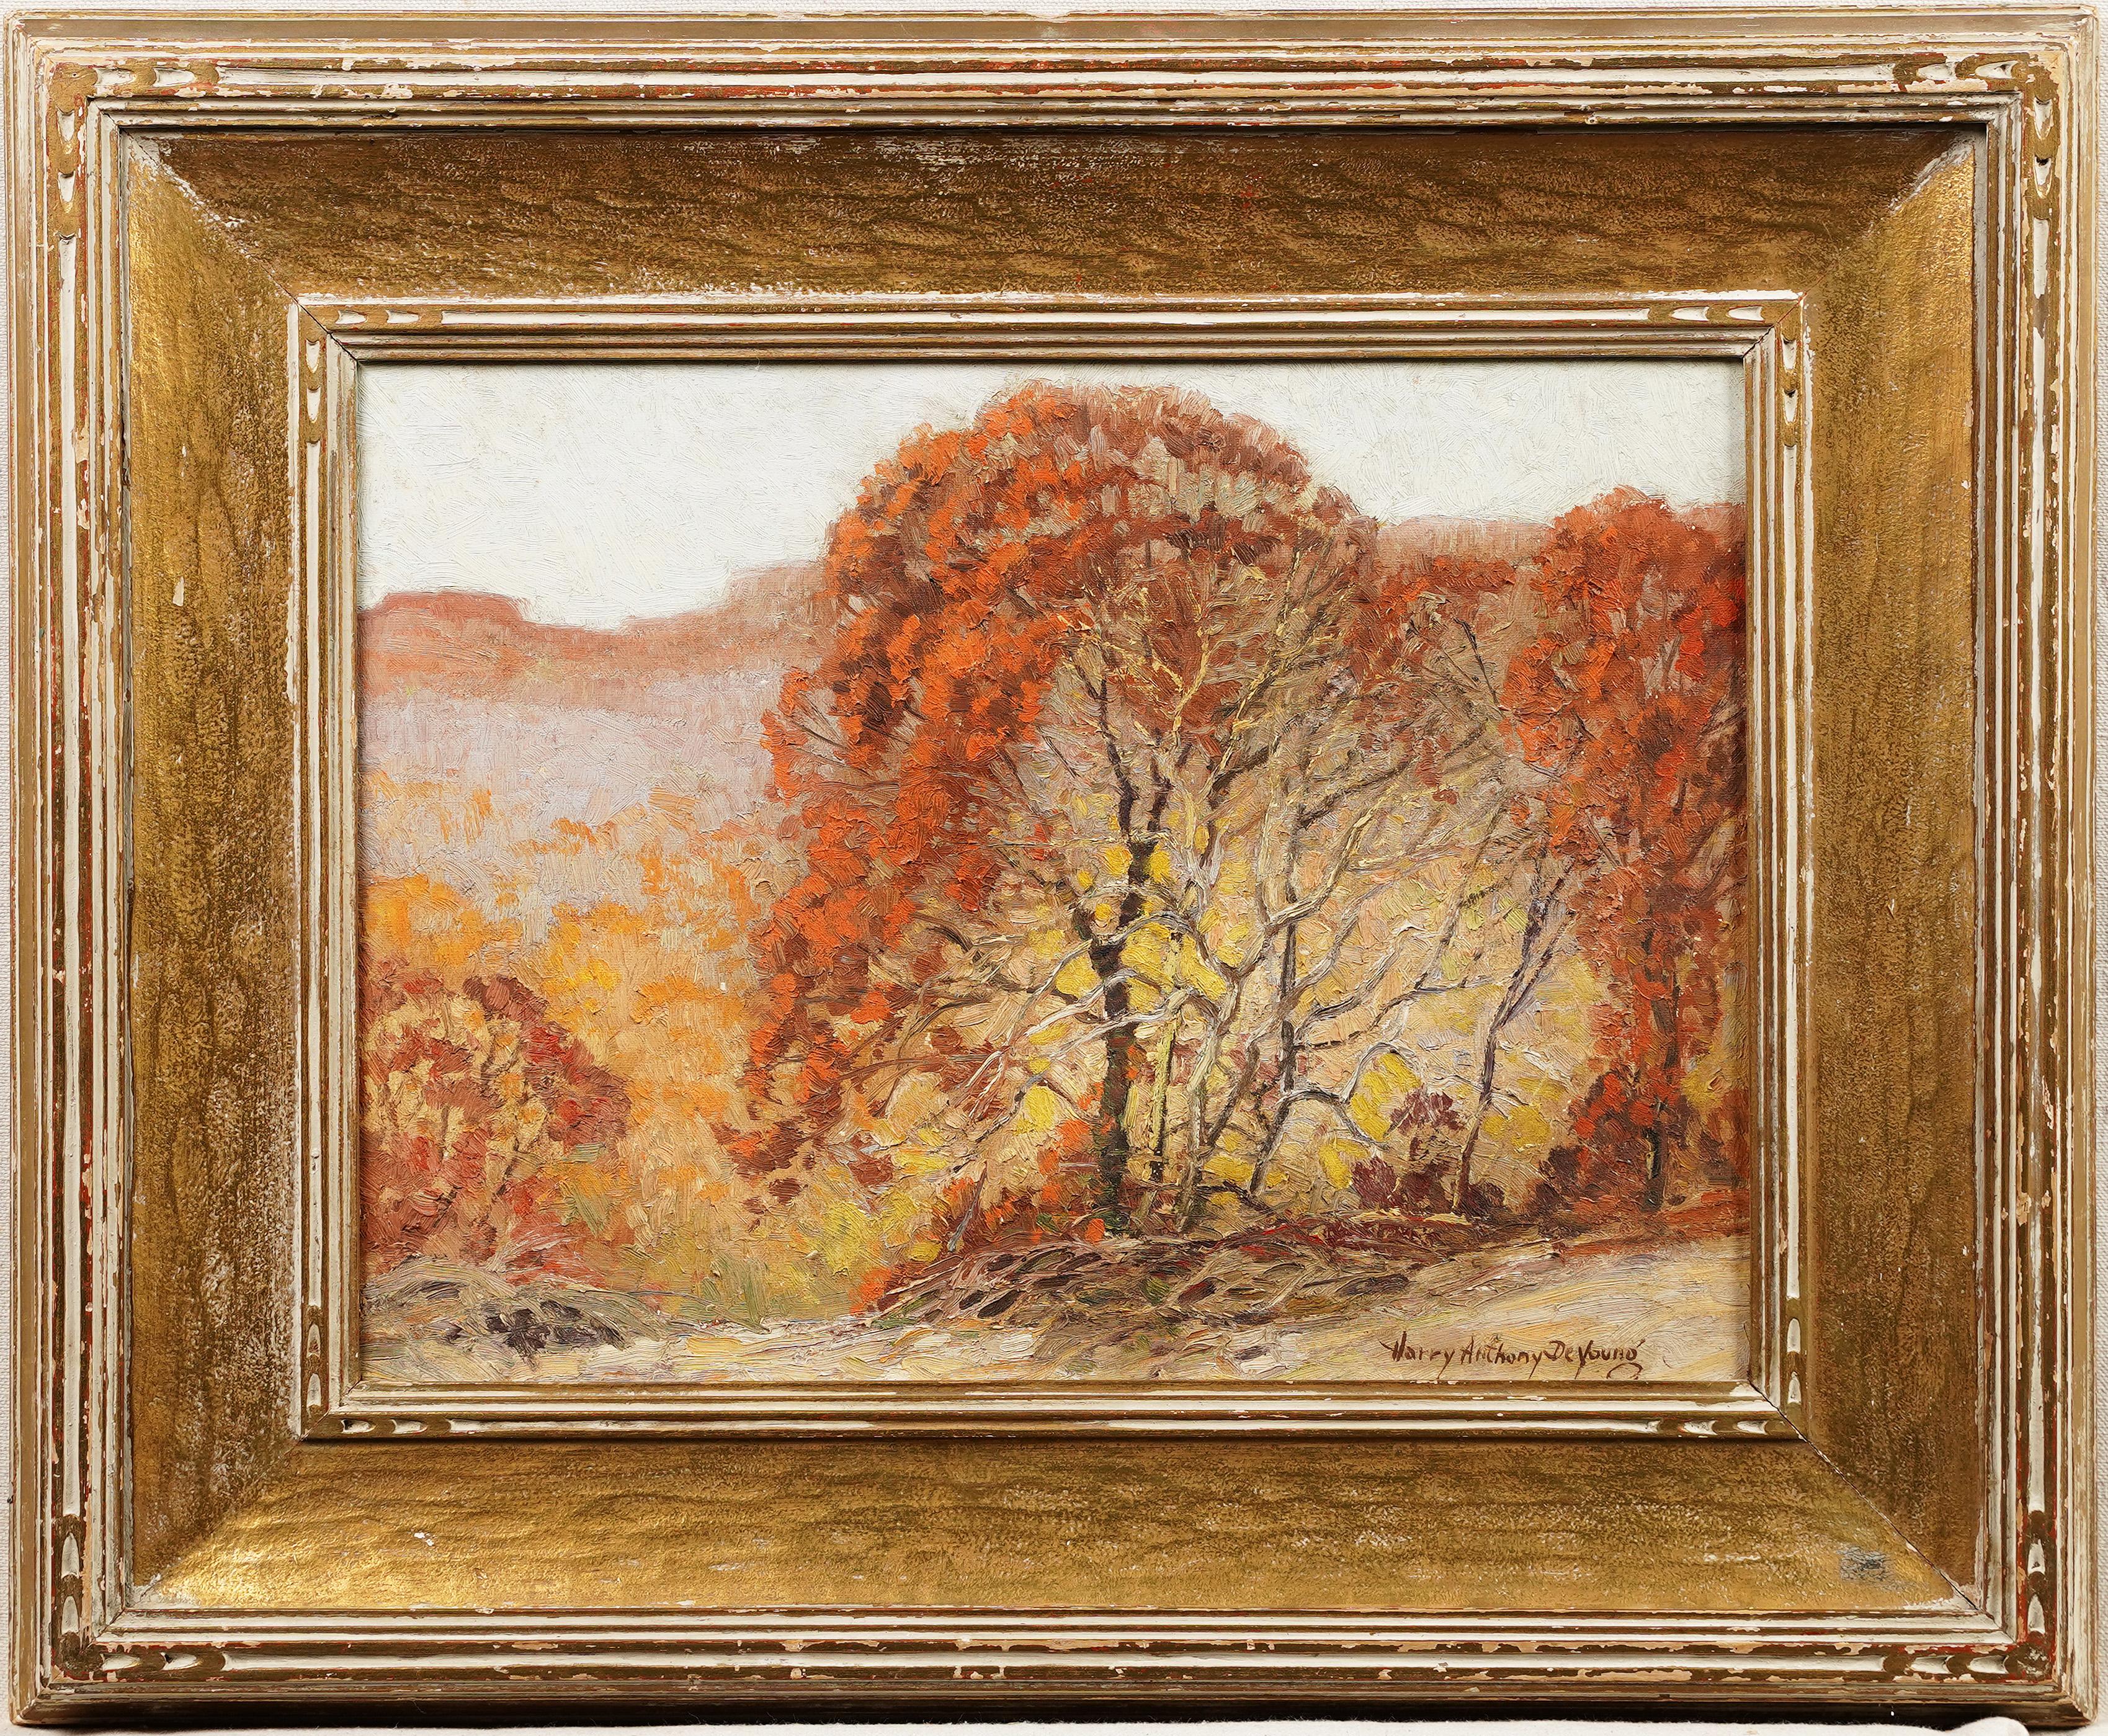  Antique American Texas Impressionist Fall Landscape Signed Framed Oil Painting - Brown Landscape Painting by Harry Anthony De Young (1893 - 1956) 